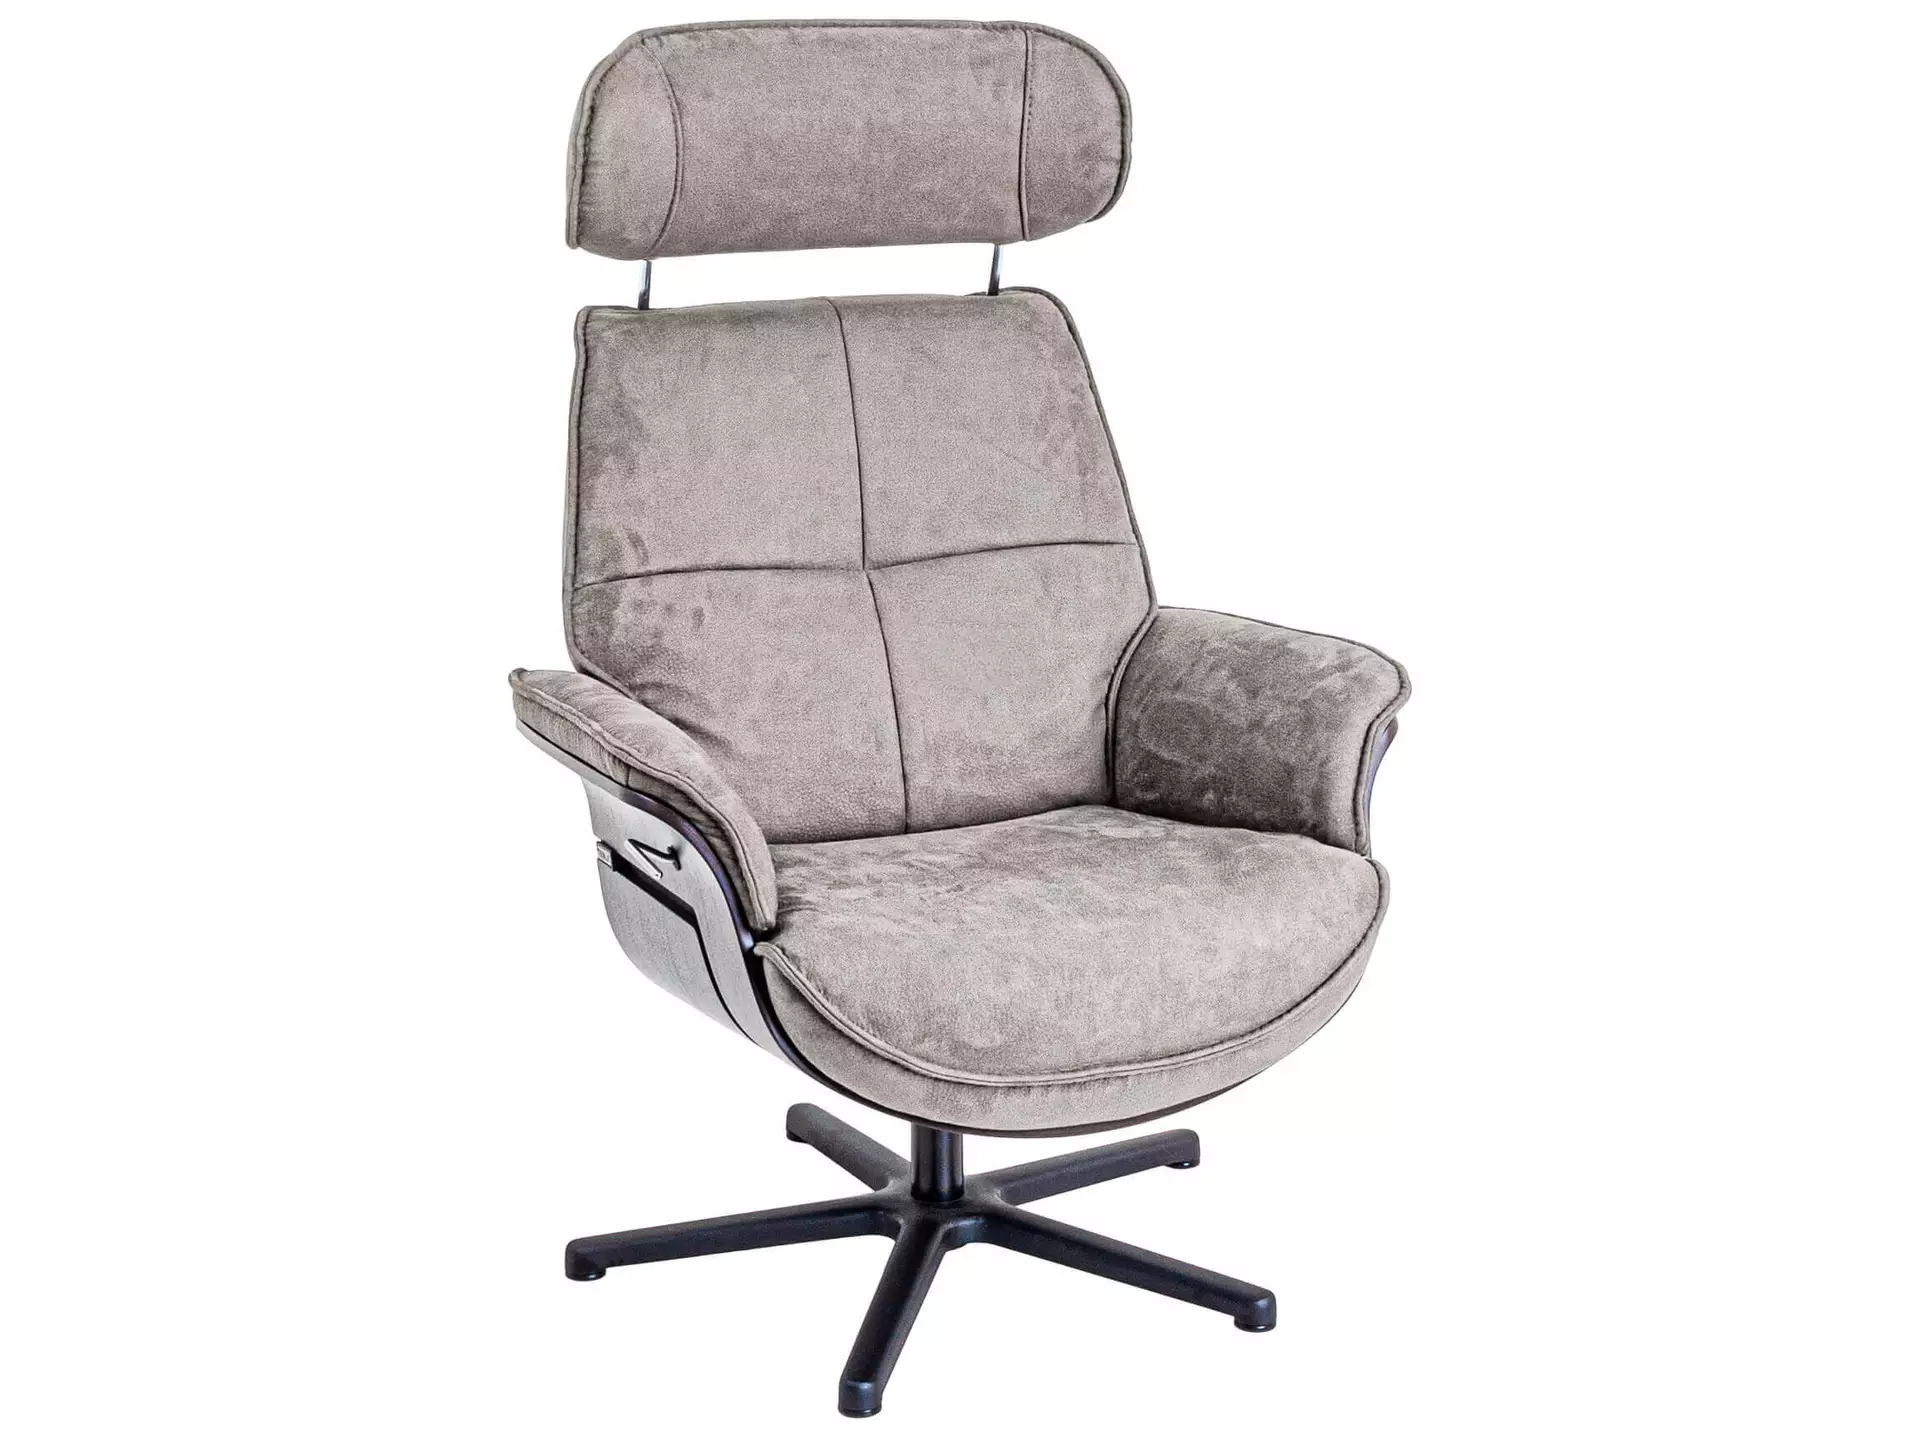 Relaxer Curacao Eiche Dunkel Basic Polipol / Farbe: Silver / Material: Stoff Basic